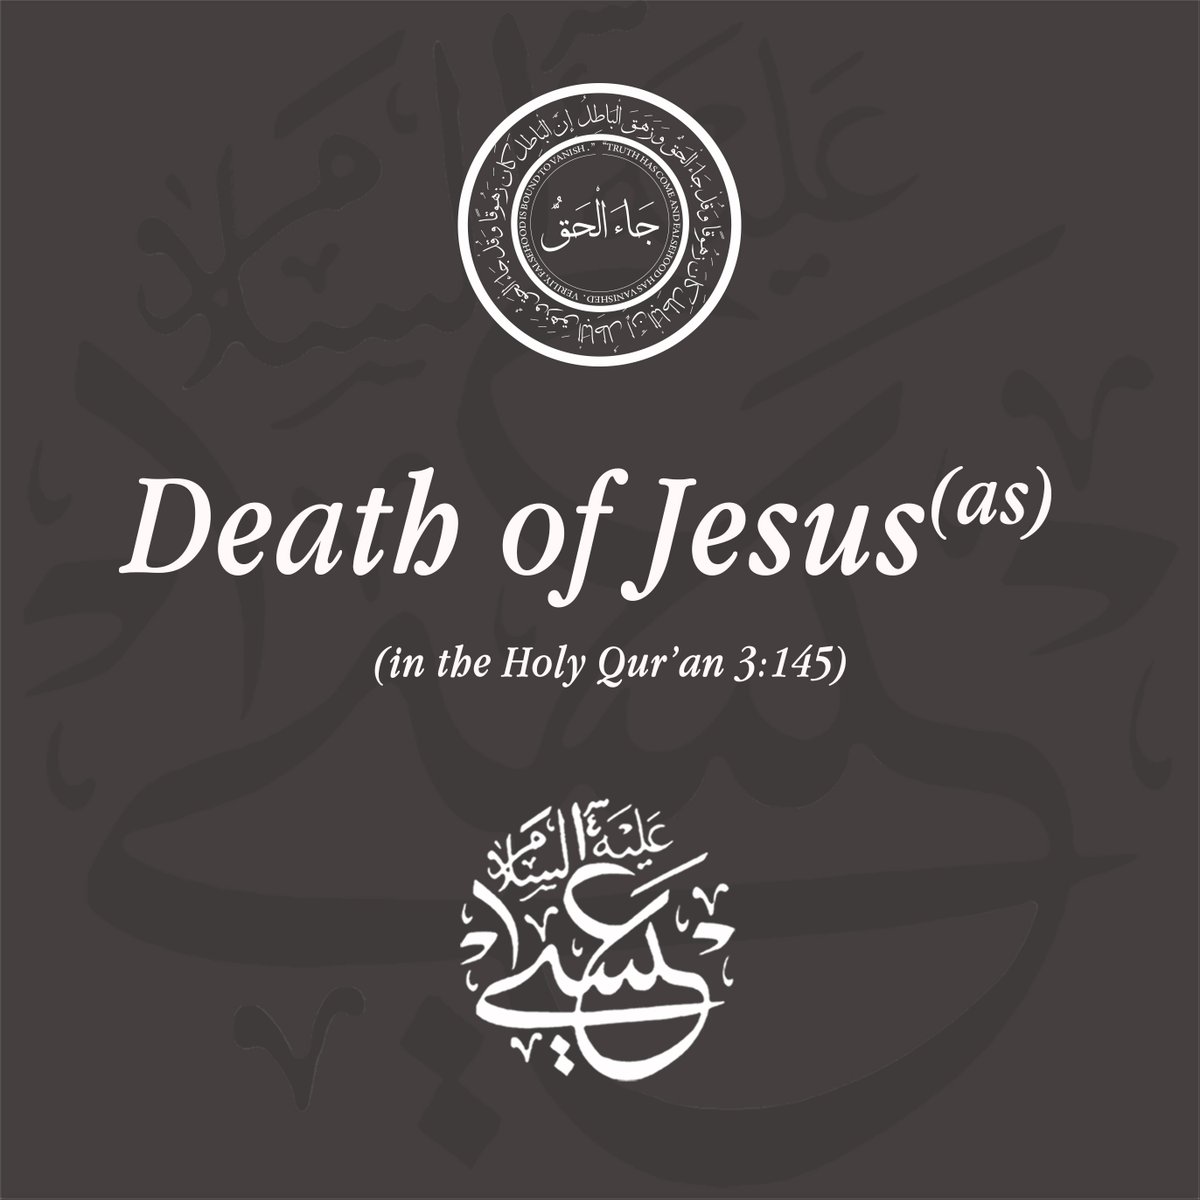 "Death of Jesus(as)" in Chapter 3, Verse 145The truth is that there is not a single evidence to prove that Jesus(as) is alive.  #DeathOfJesus  #Islam  #Ahmadiyya  #HolyQuran {THREAD}